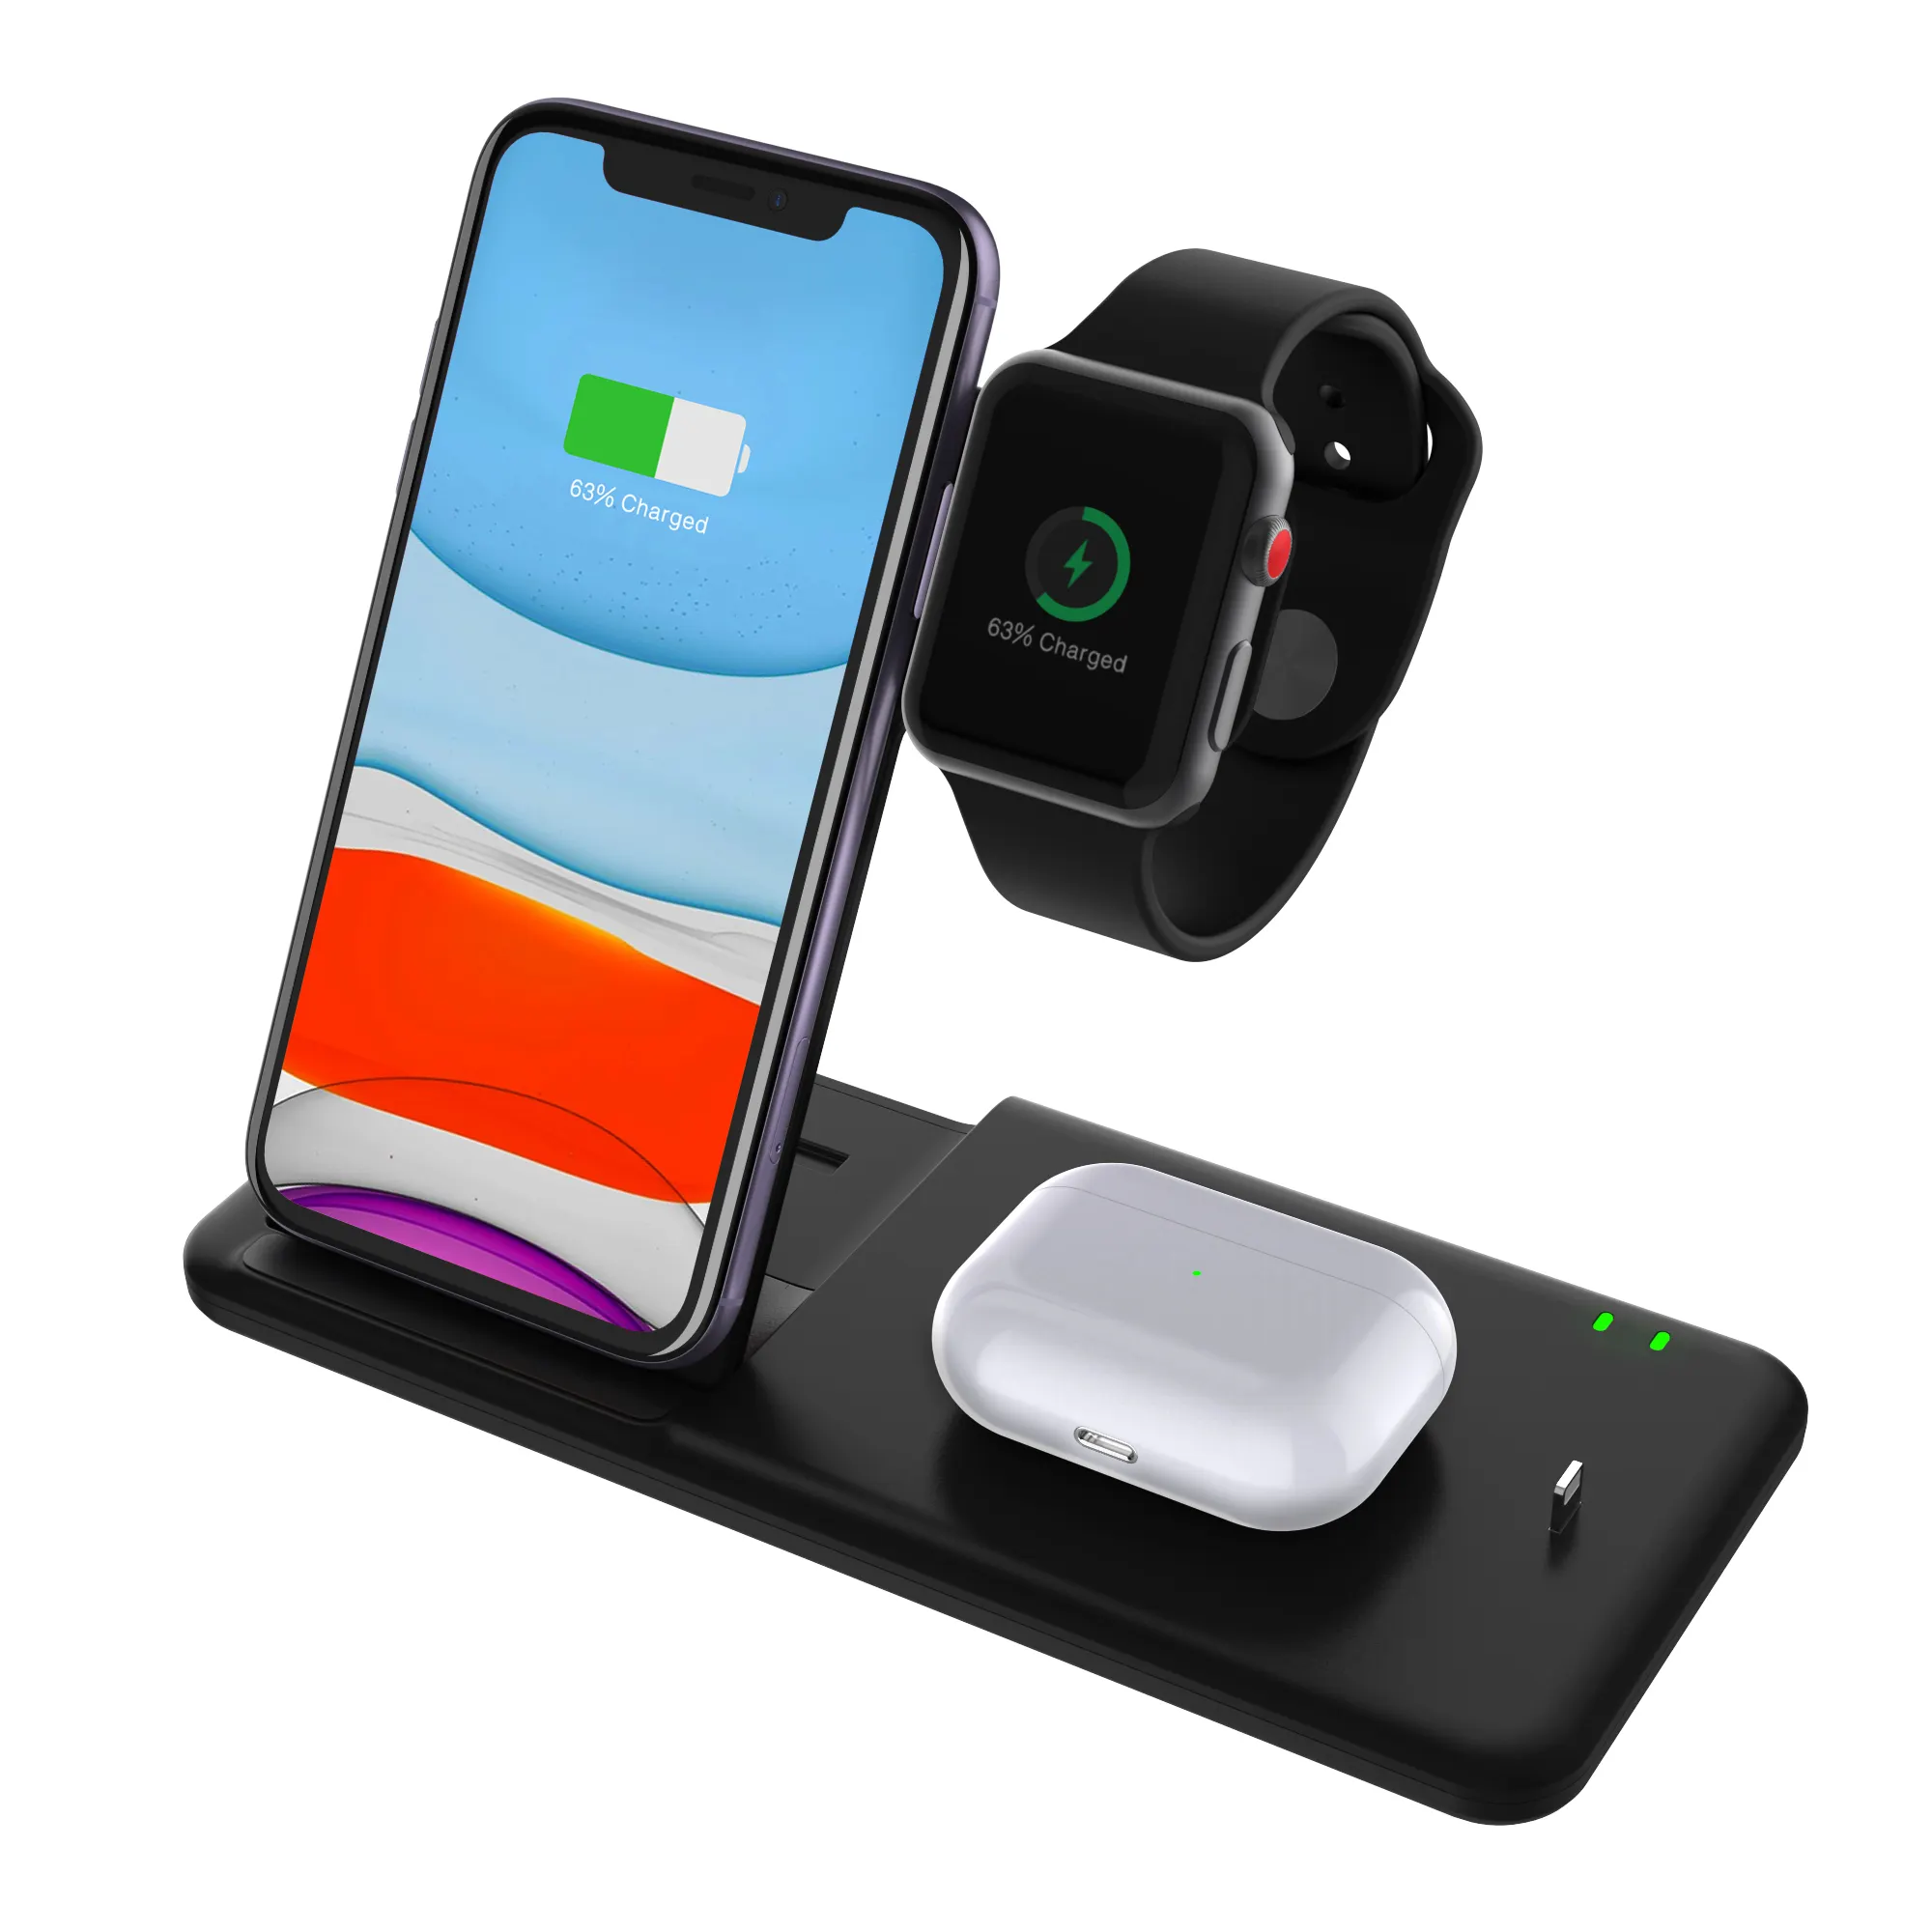 4 in 1 Fast Wireless Charger for iPhone/iWatch/Airpods 15W 10W 7.5W 5W dual wireless charger stand Qi Wireless Charging